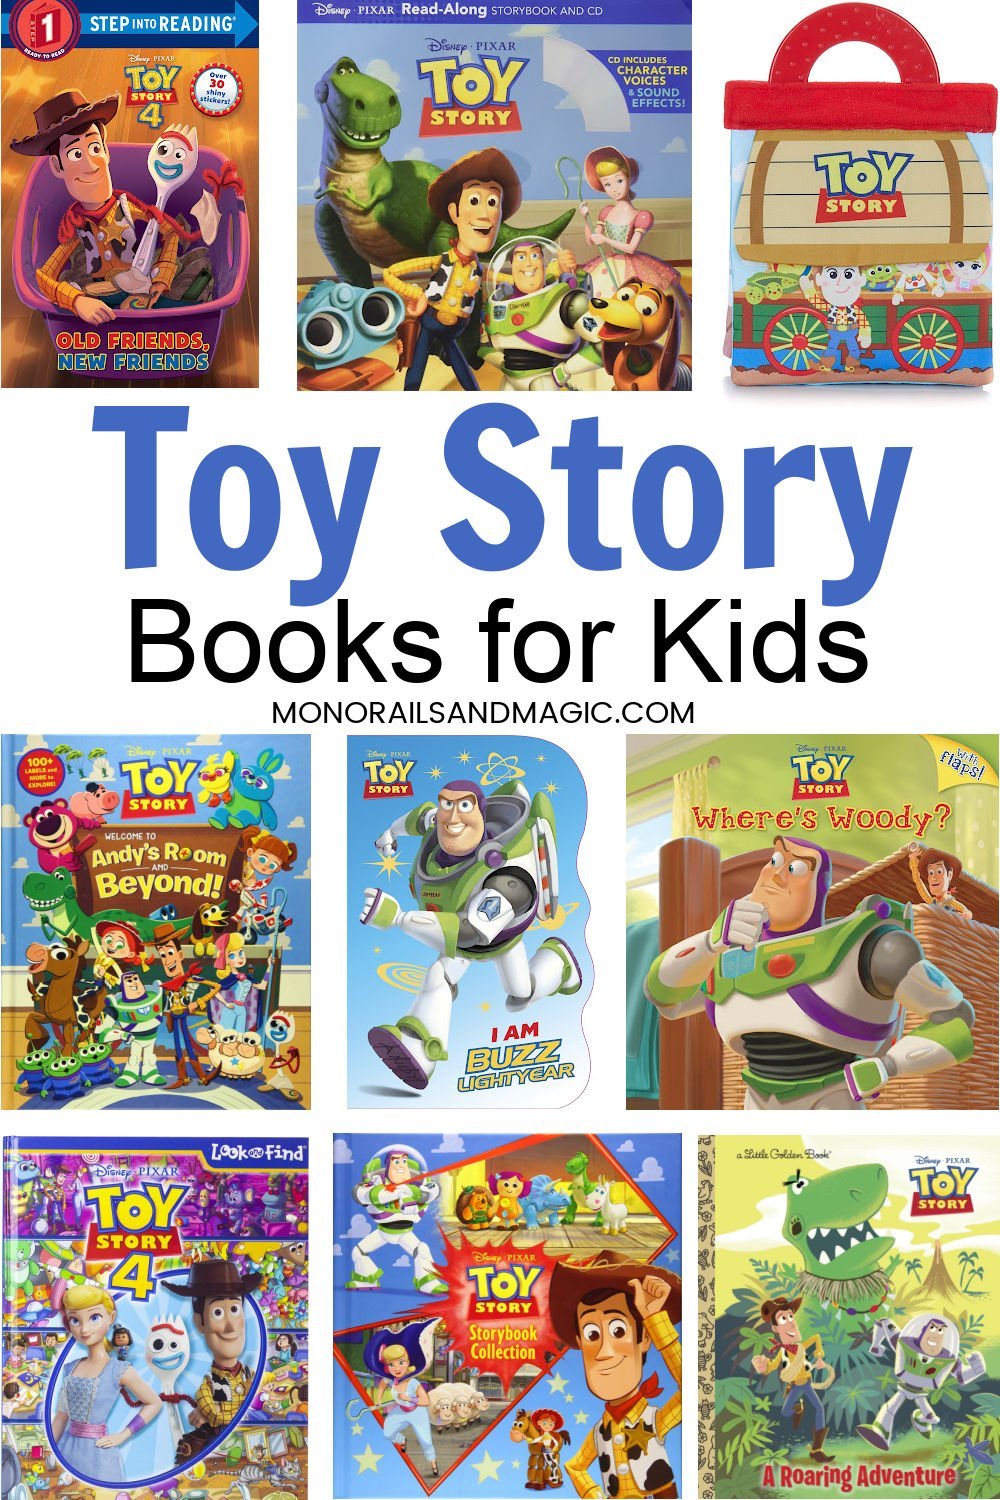 A list of Toy Story books for kids.